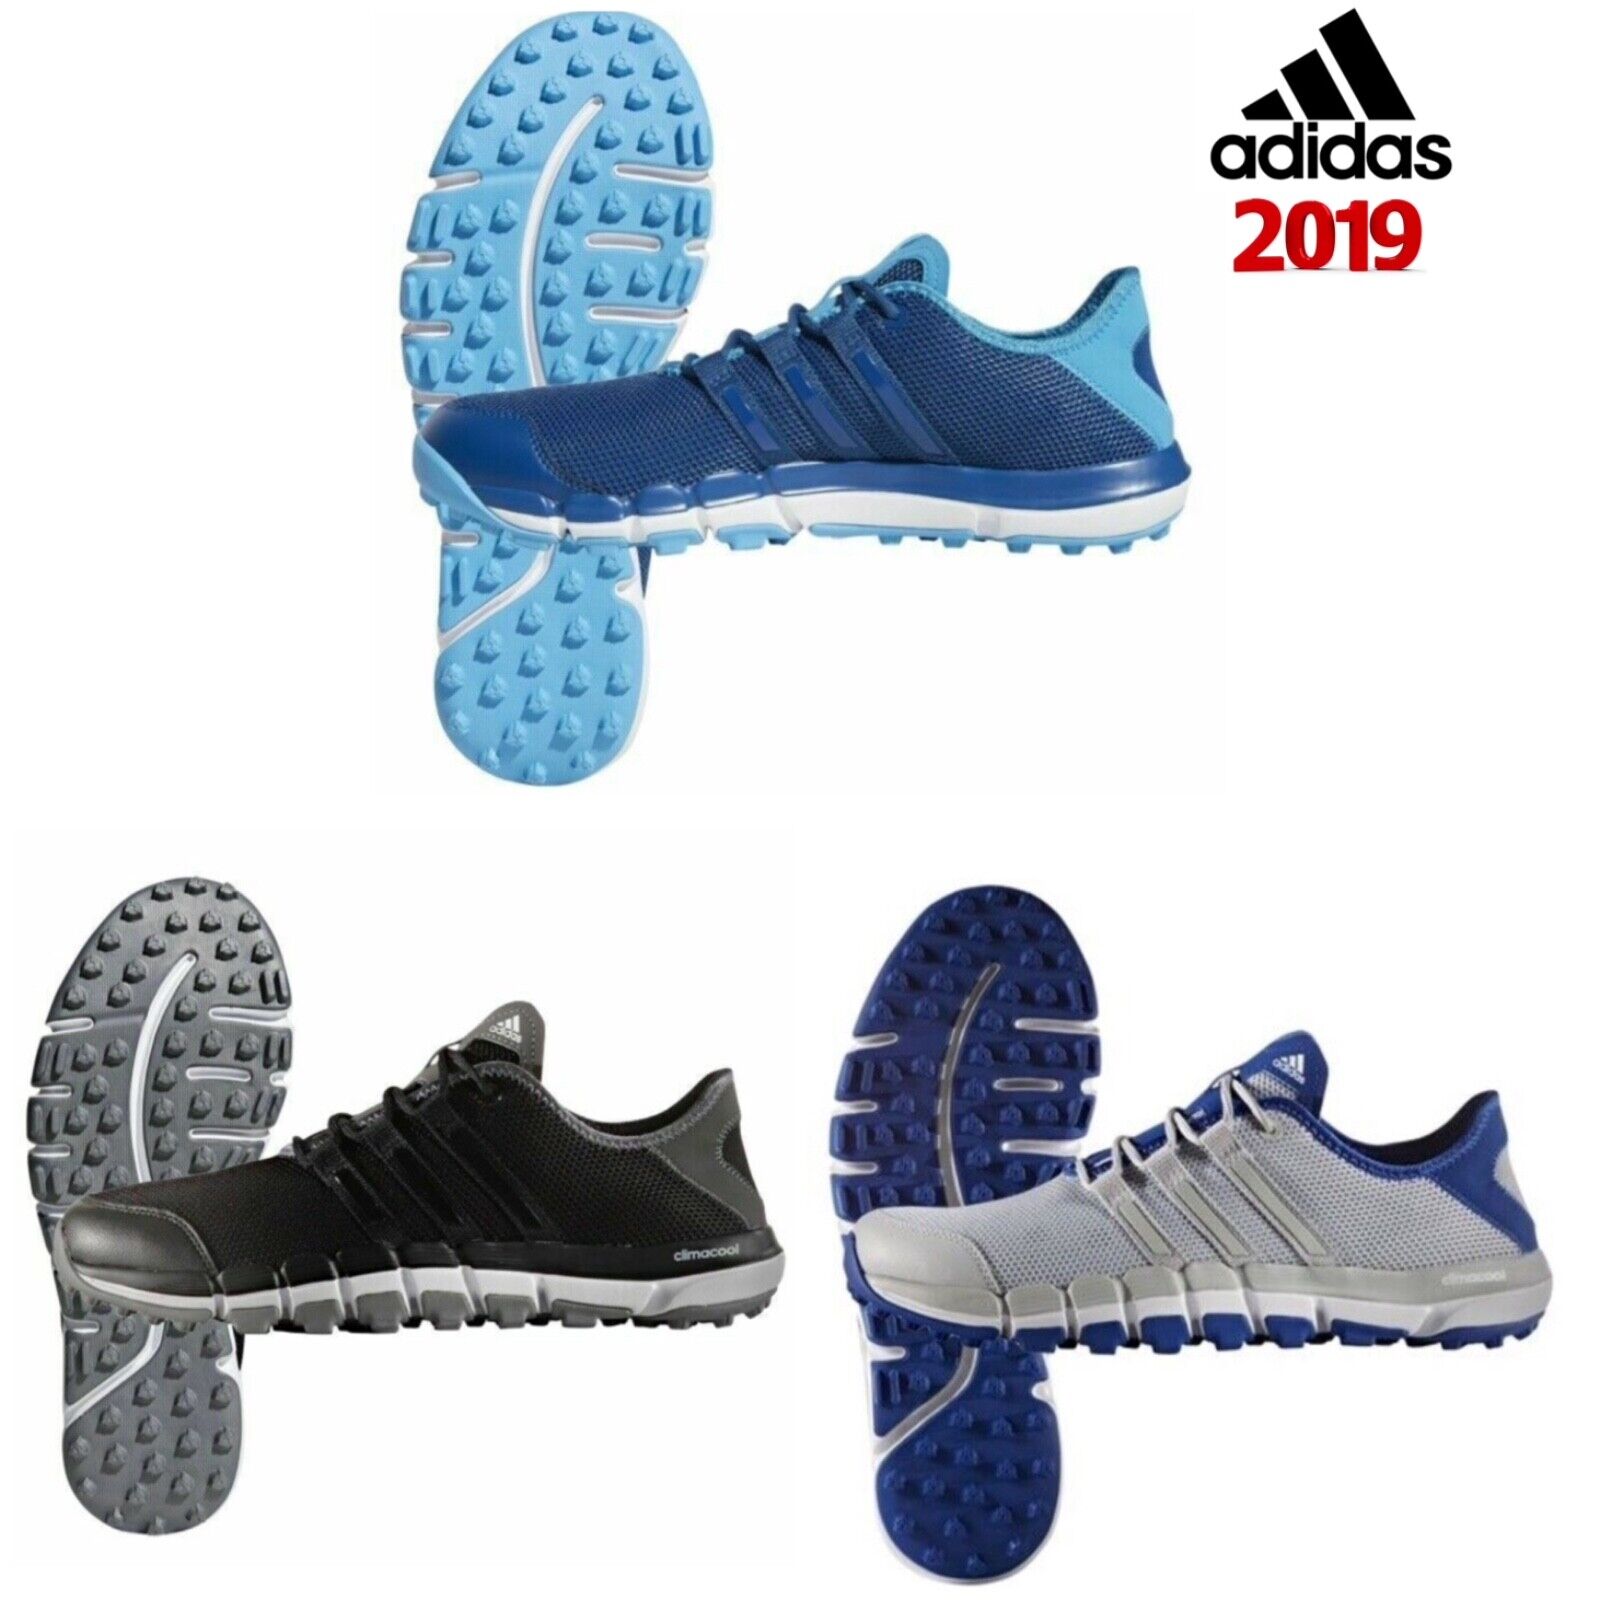 adidas climacool st golf shoes